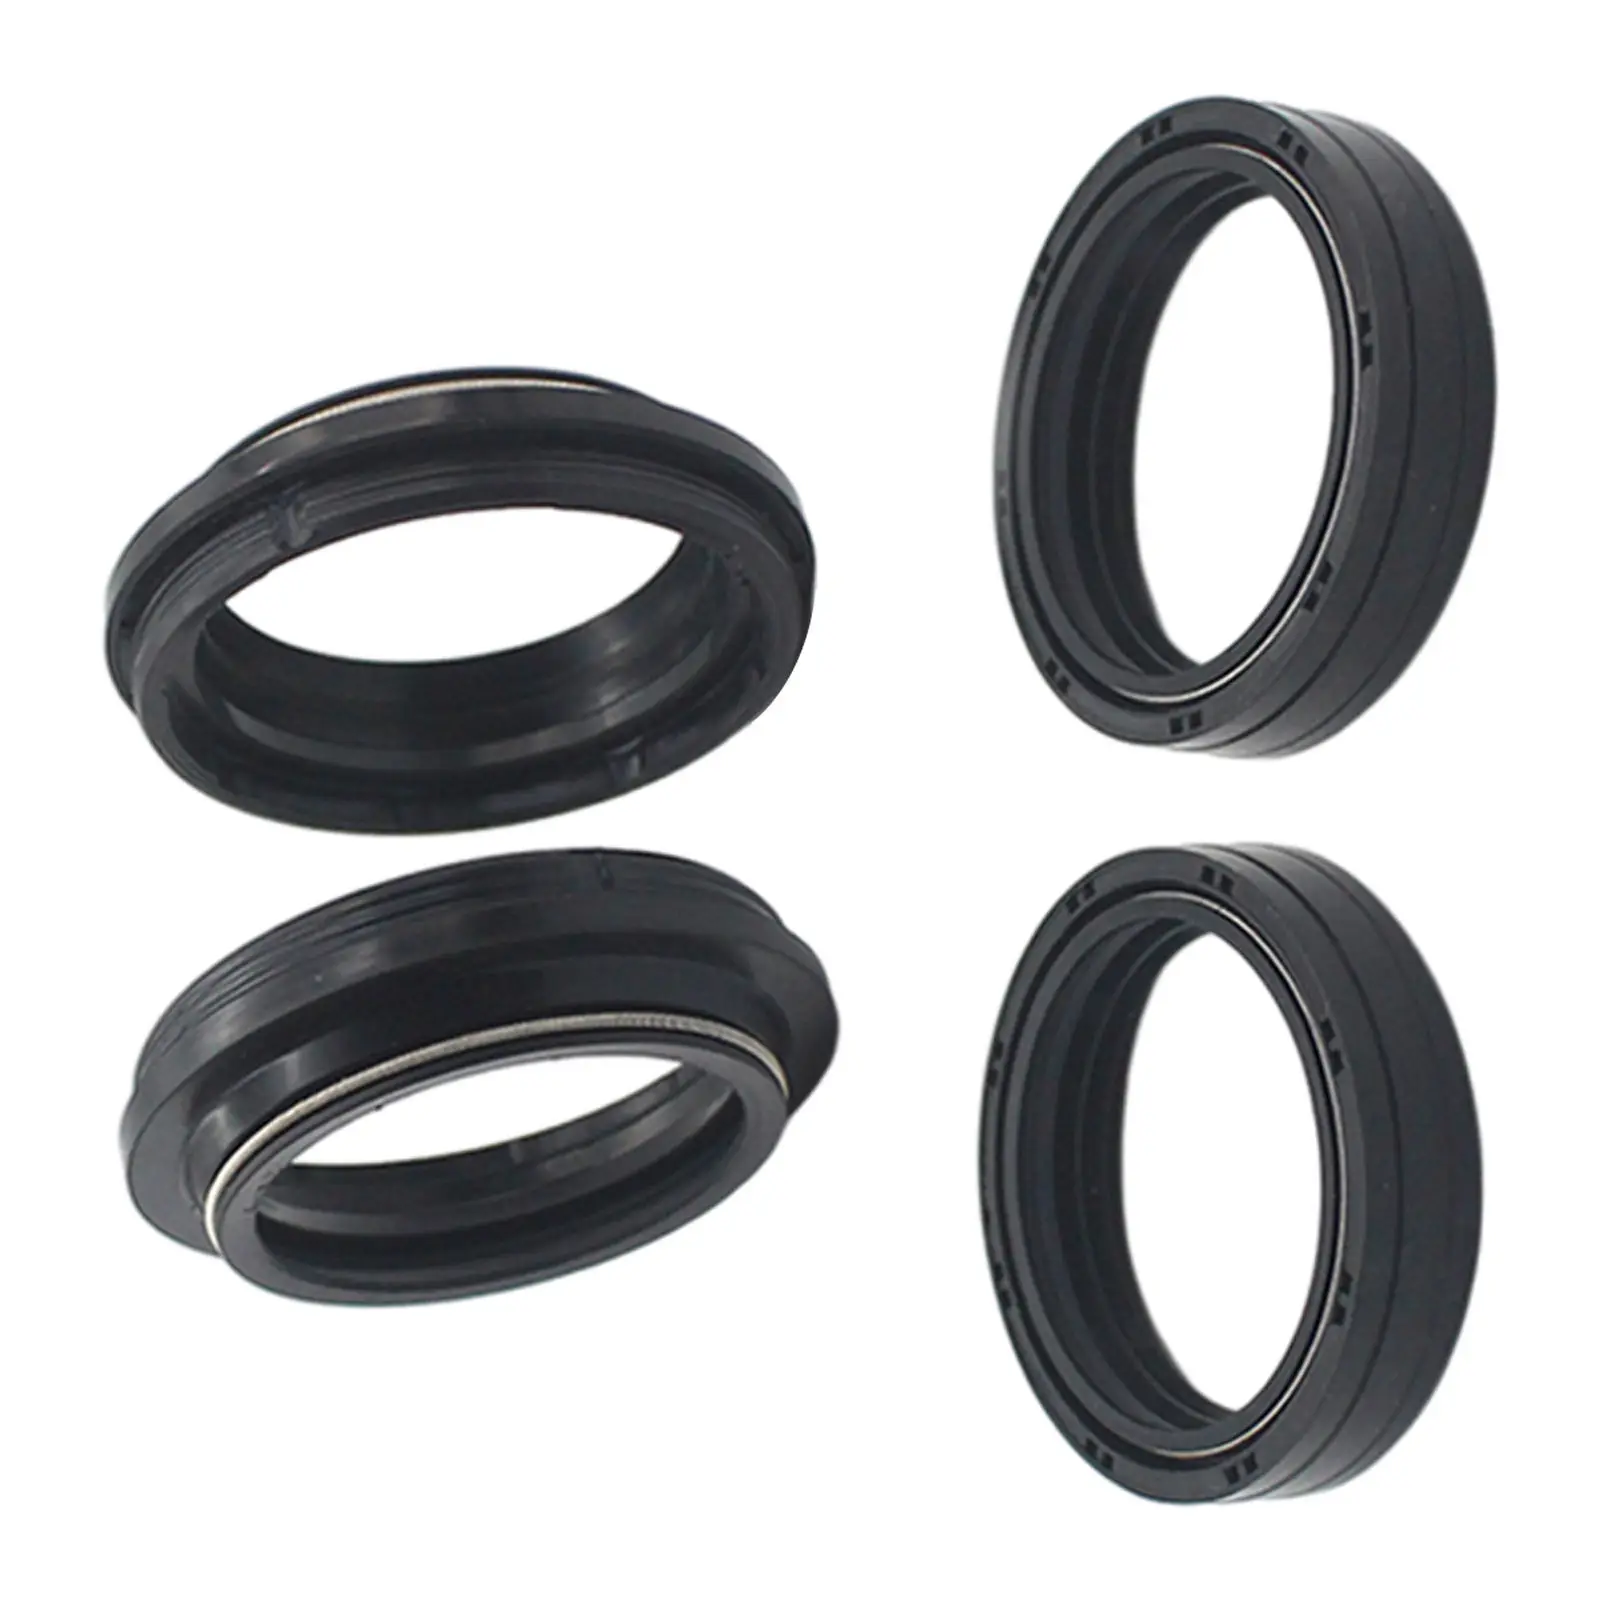 Fork and Dust Seal Kit Replaces Motorcycle Dust Wiper Kit for R1200GS 2004-2012 for BMW